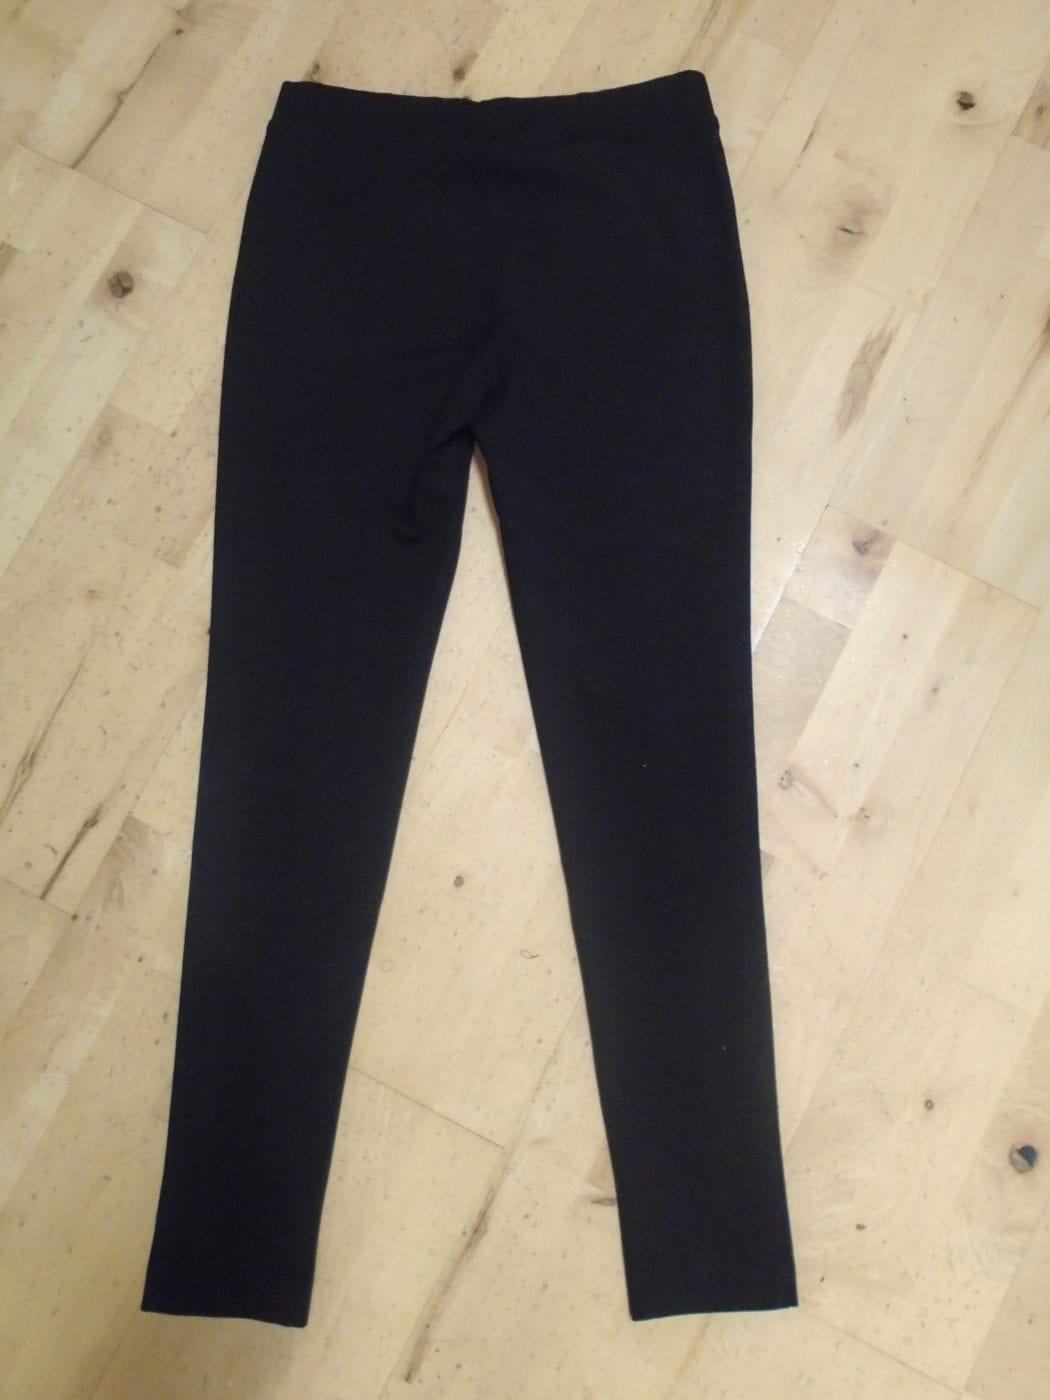 Pomodoro Black Essential Jegging Trouser 5205757 | butterfliesfashions ...